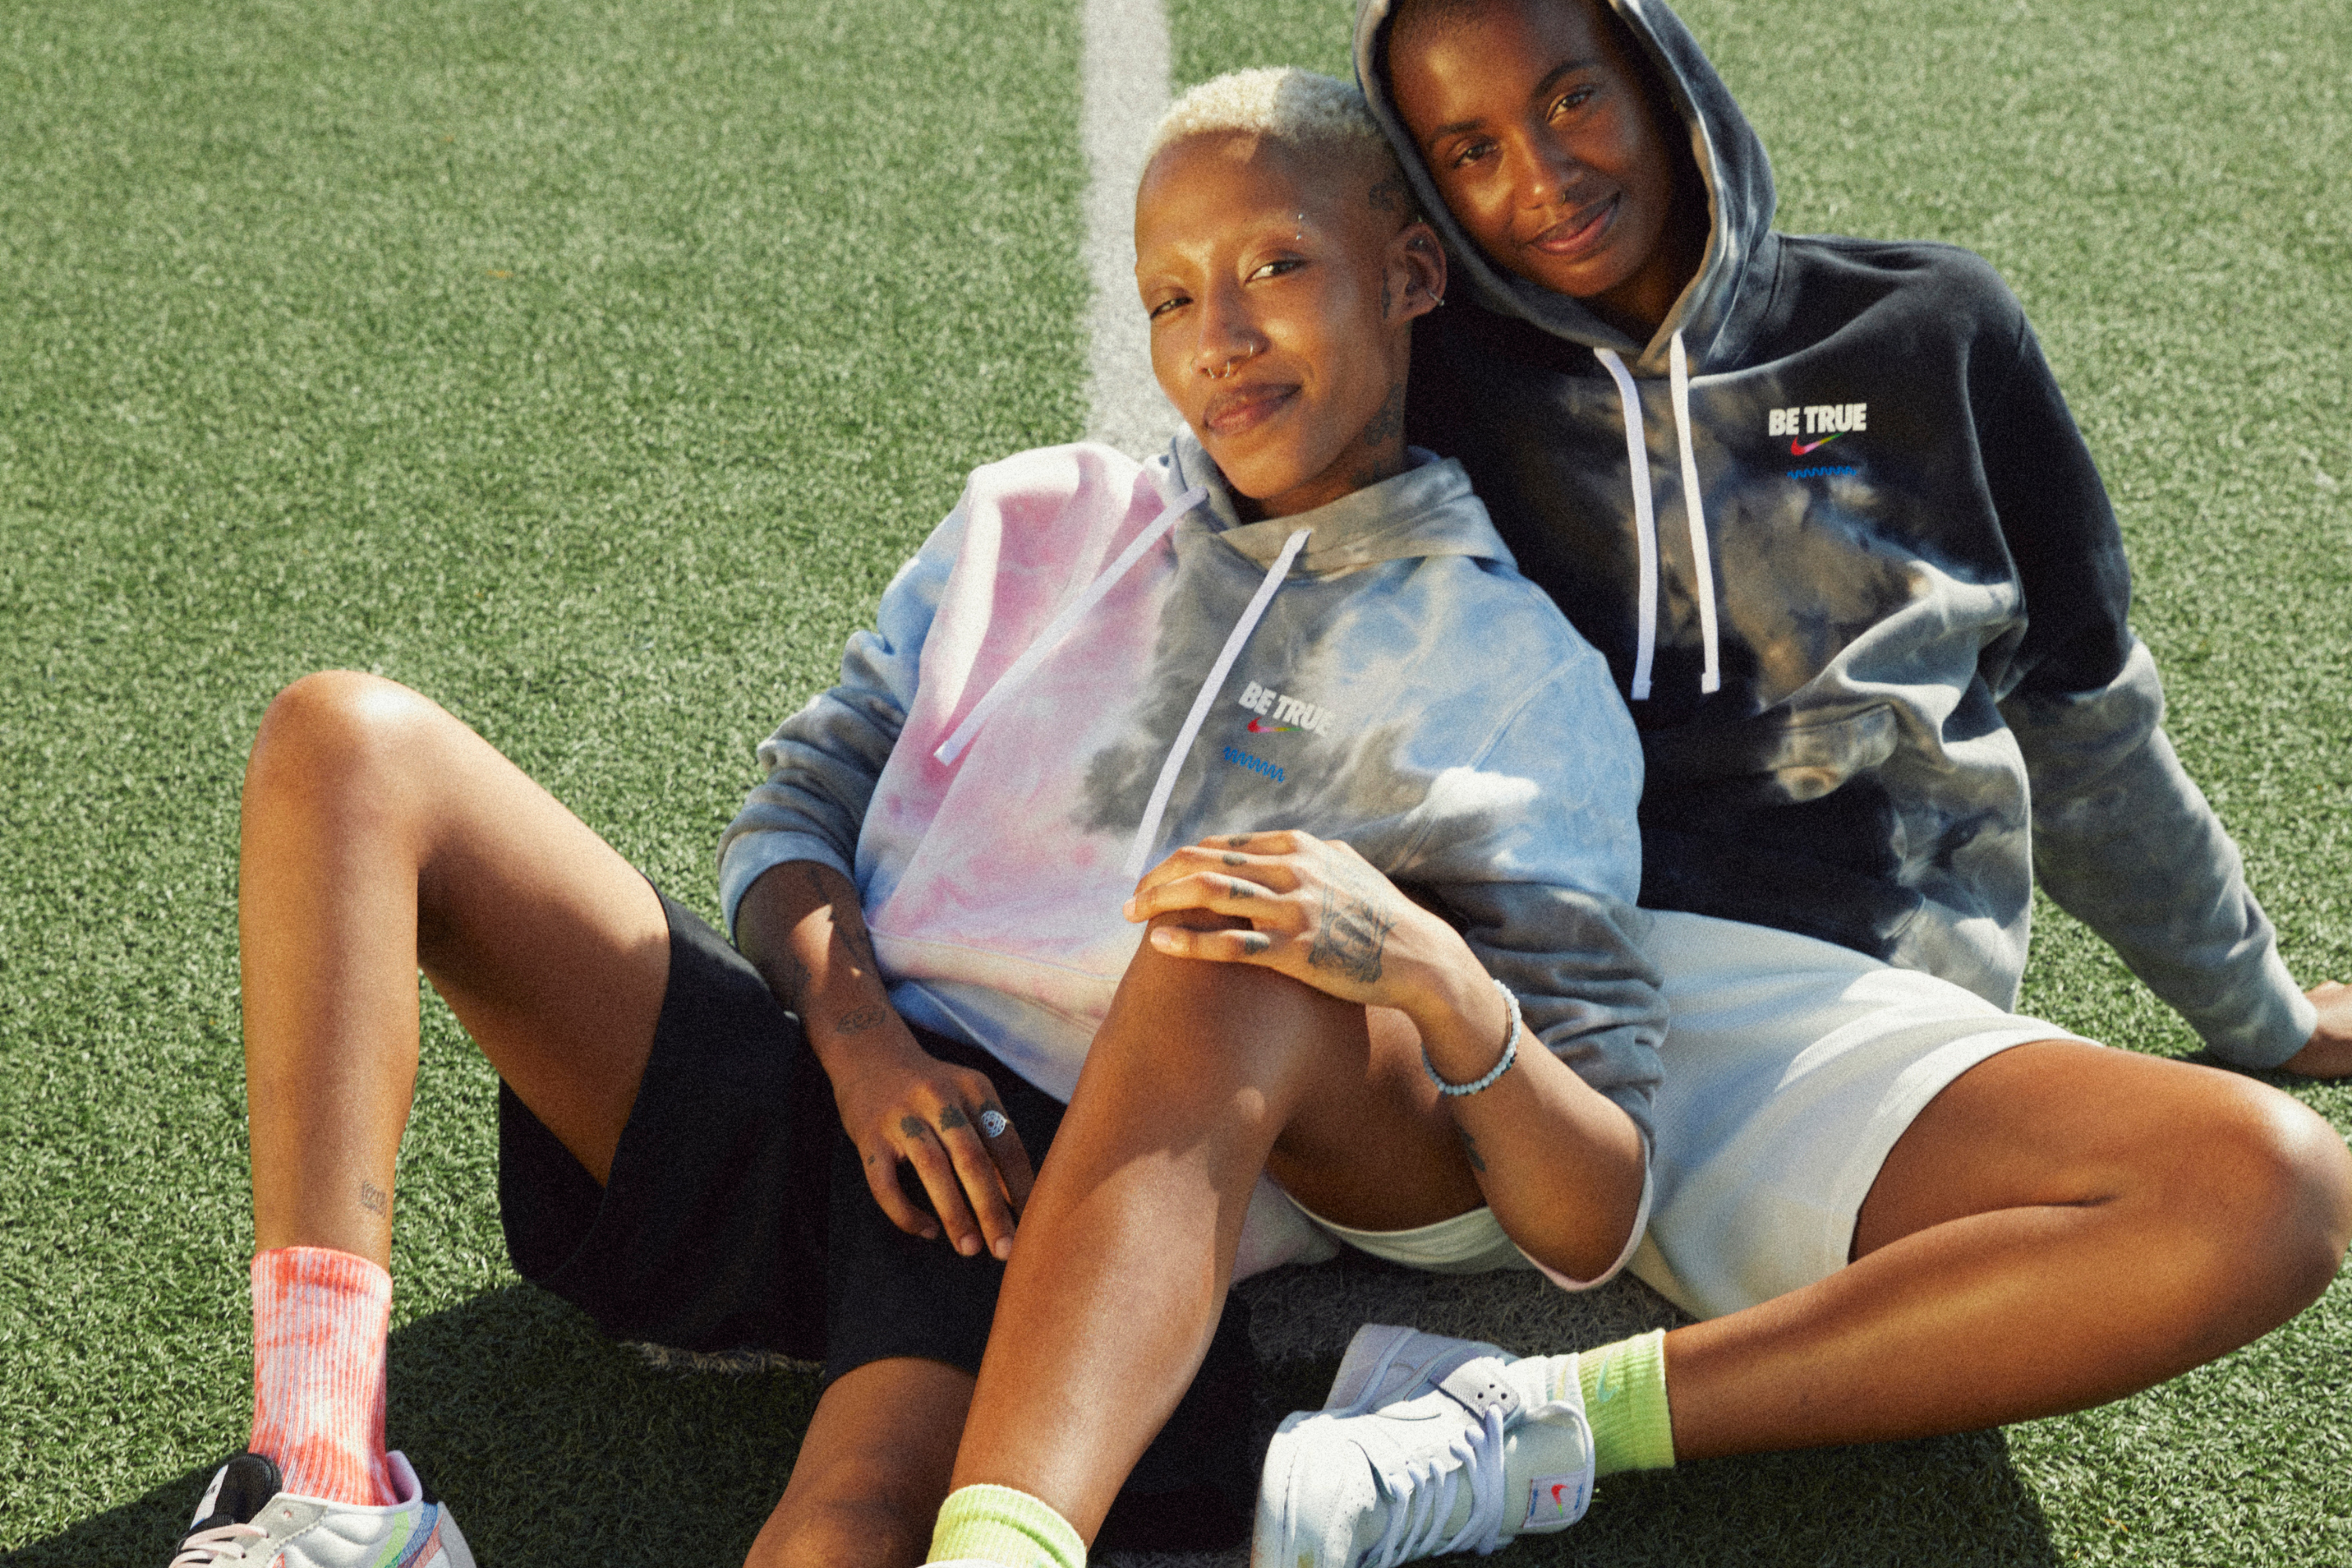 Nike Kicks Off Pride Month With All-New 'Be True' Collection